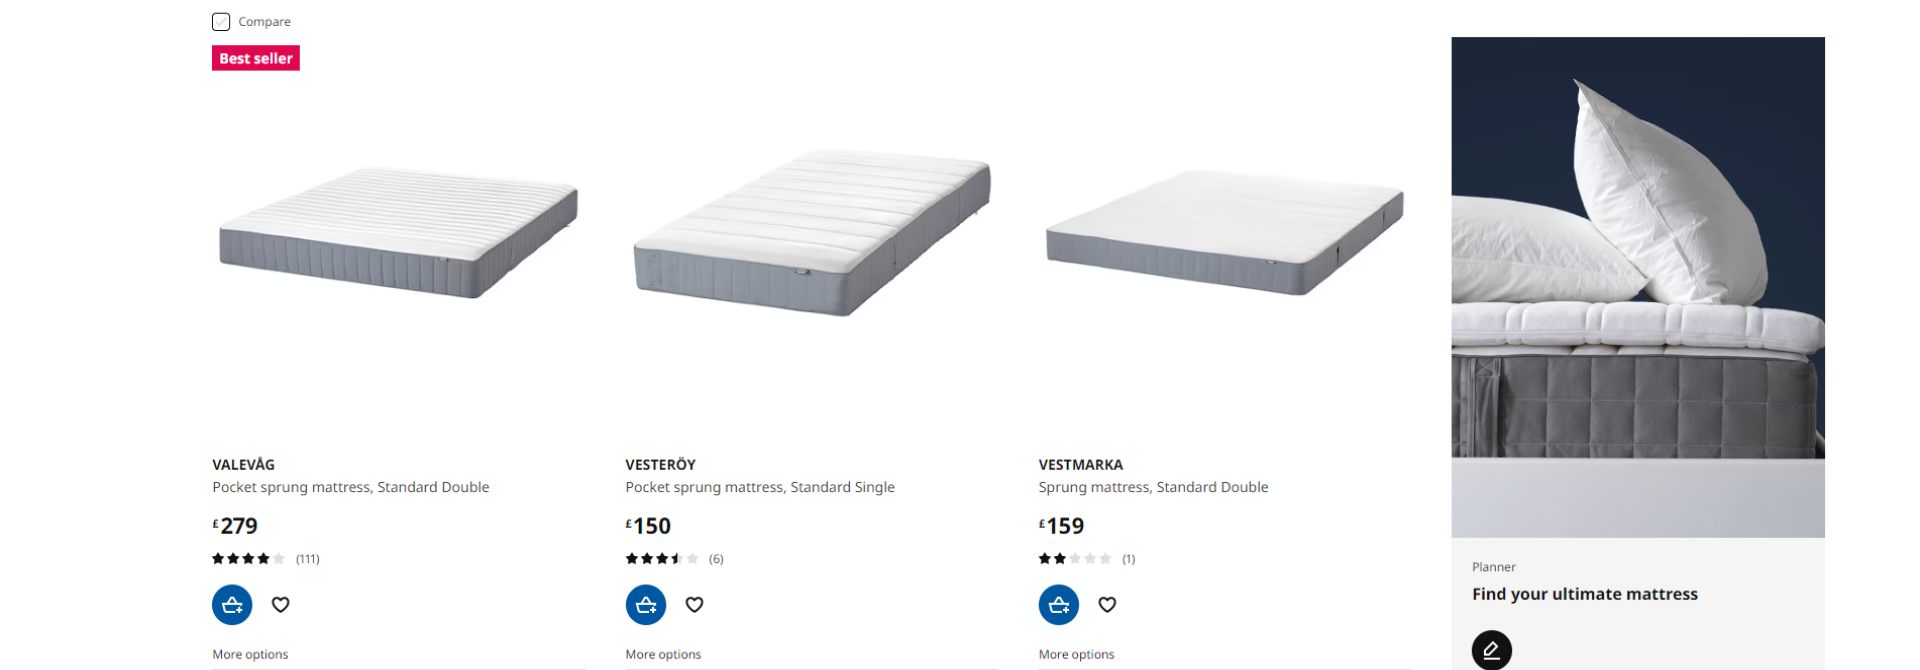 List of products in IKEA online store